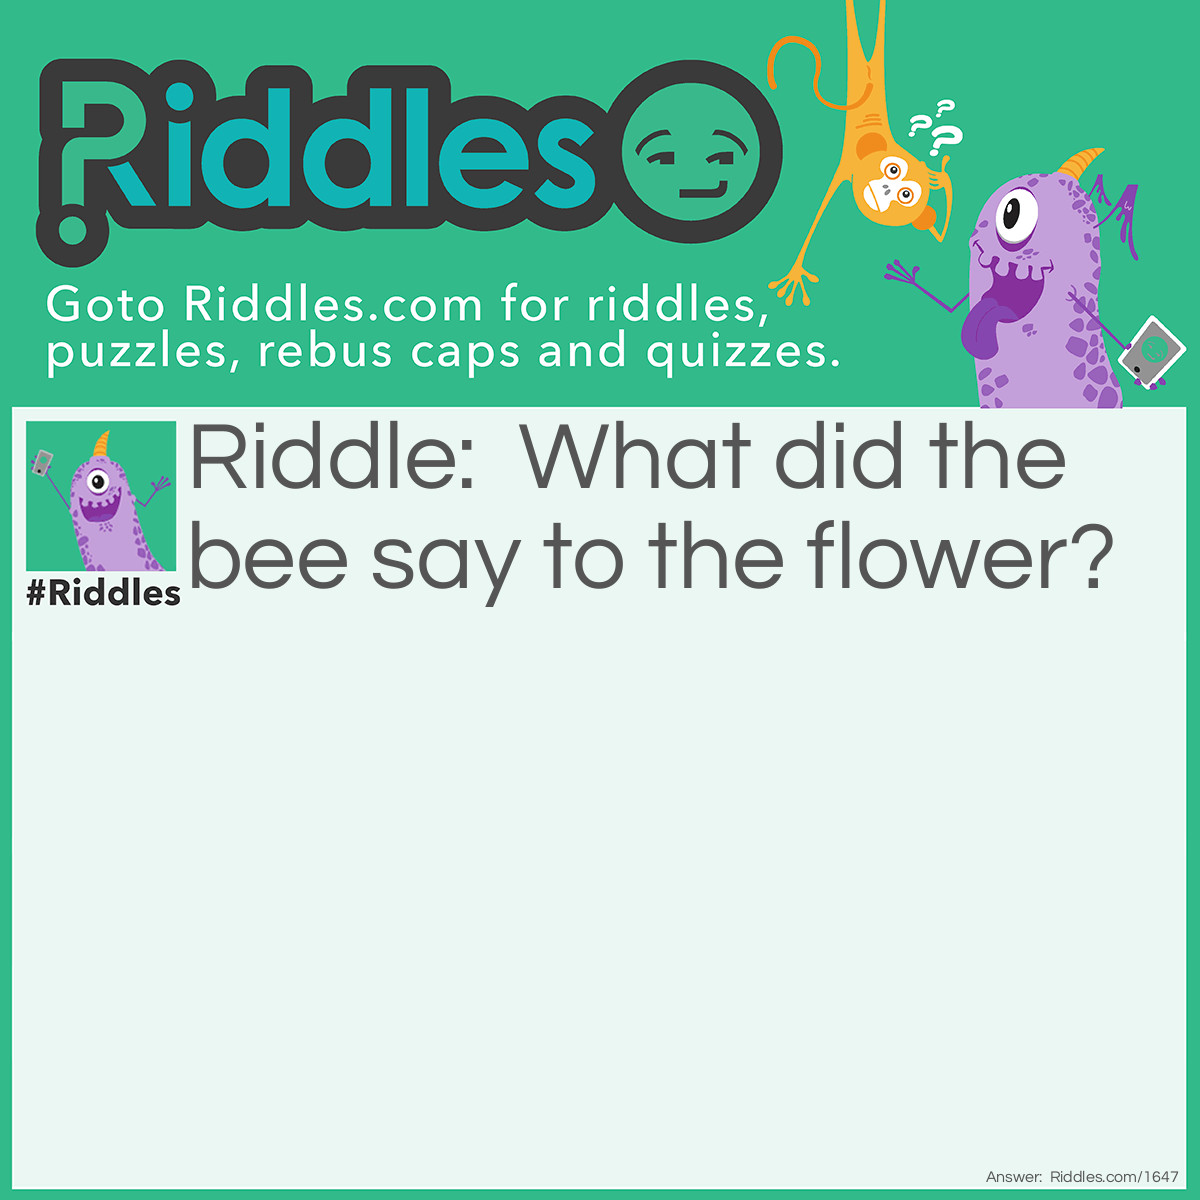 Riddle: What did the bee say to the flower? Answer: Hello, honey!